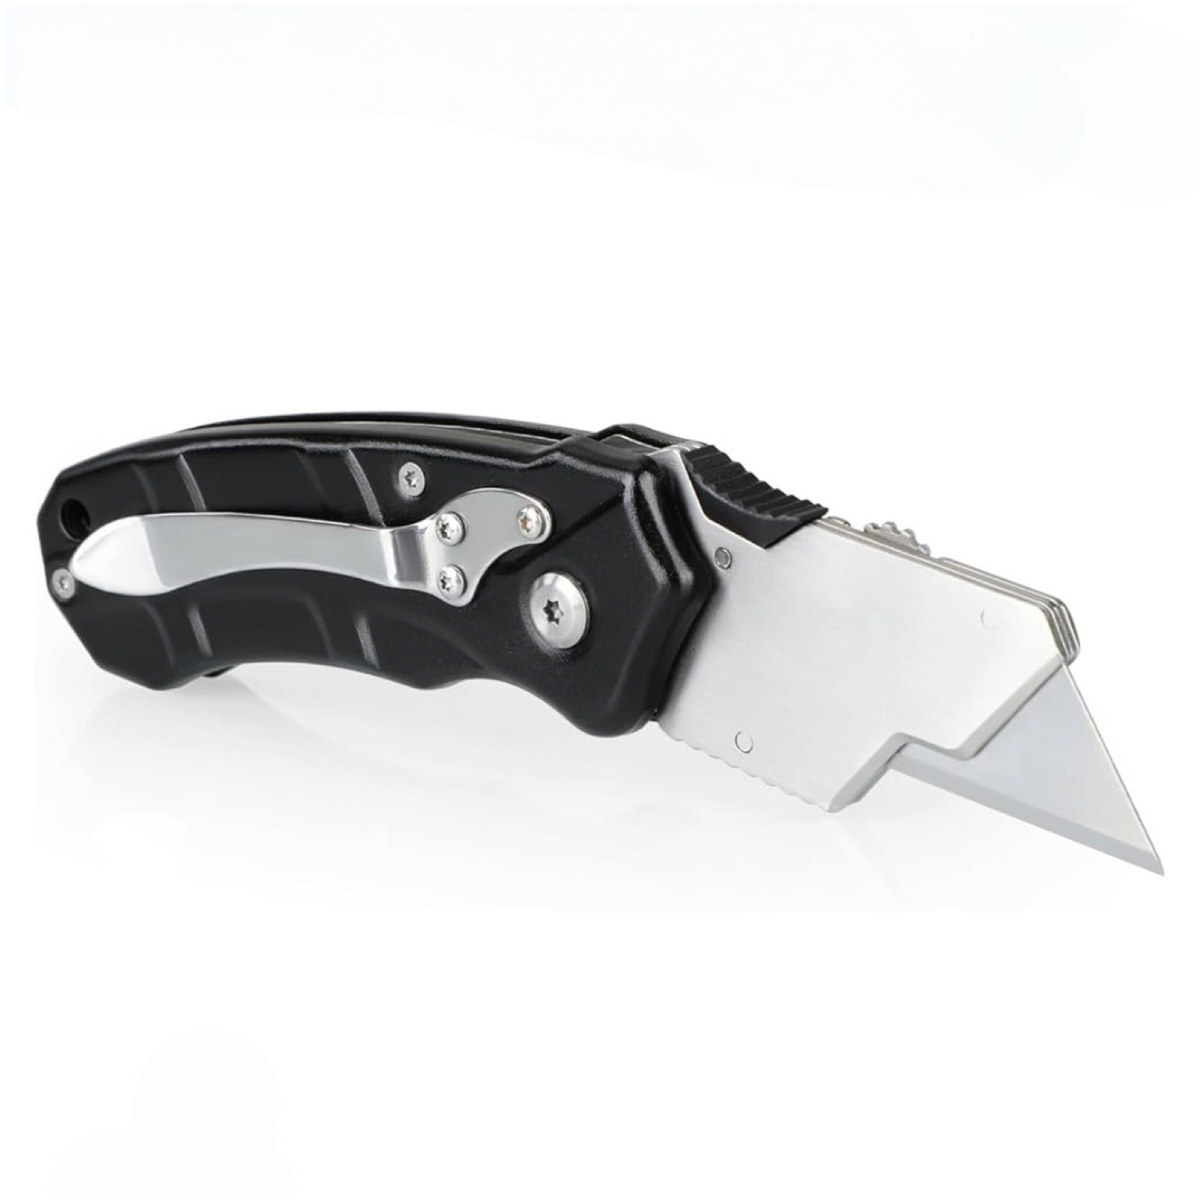 Olympia Turbofold Utility Box Cutter Knife - 5 Blades Included